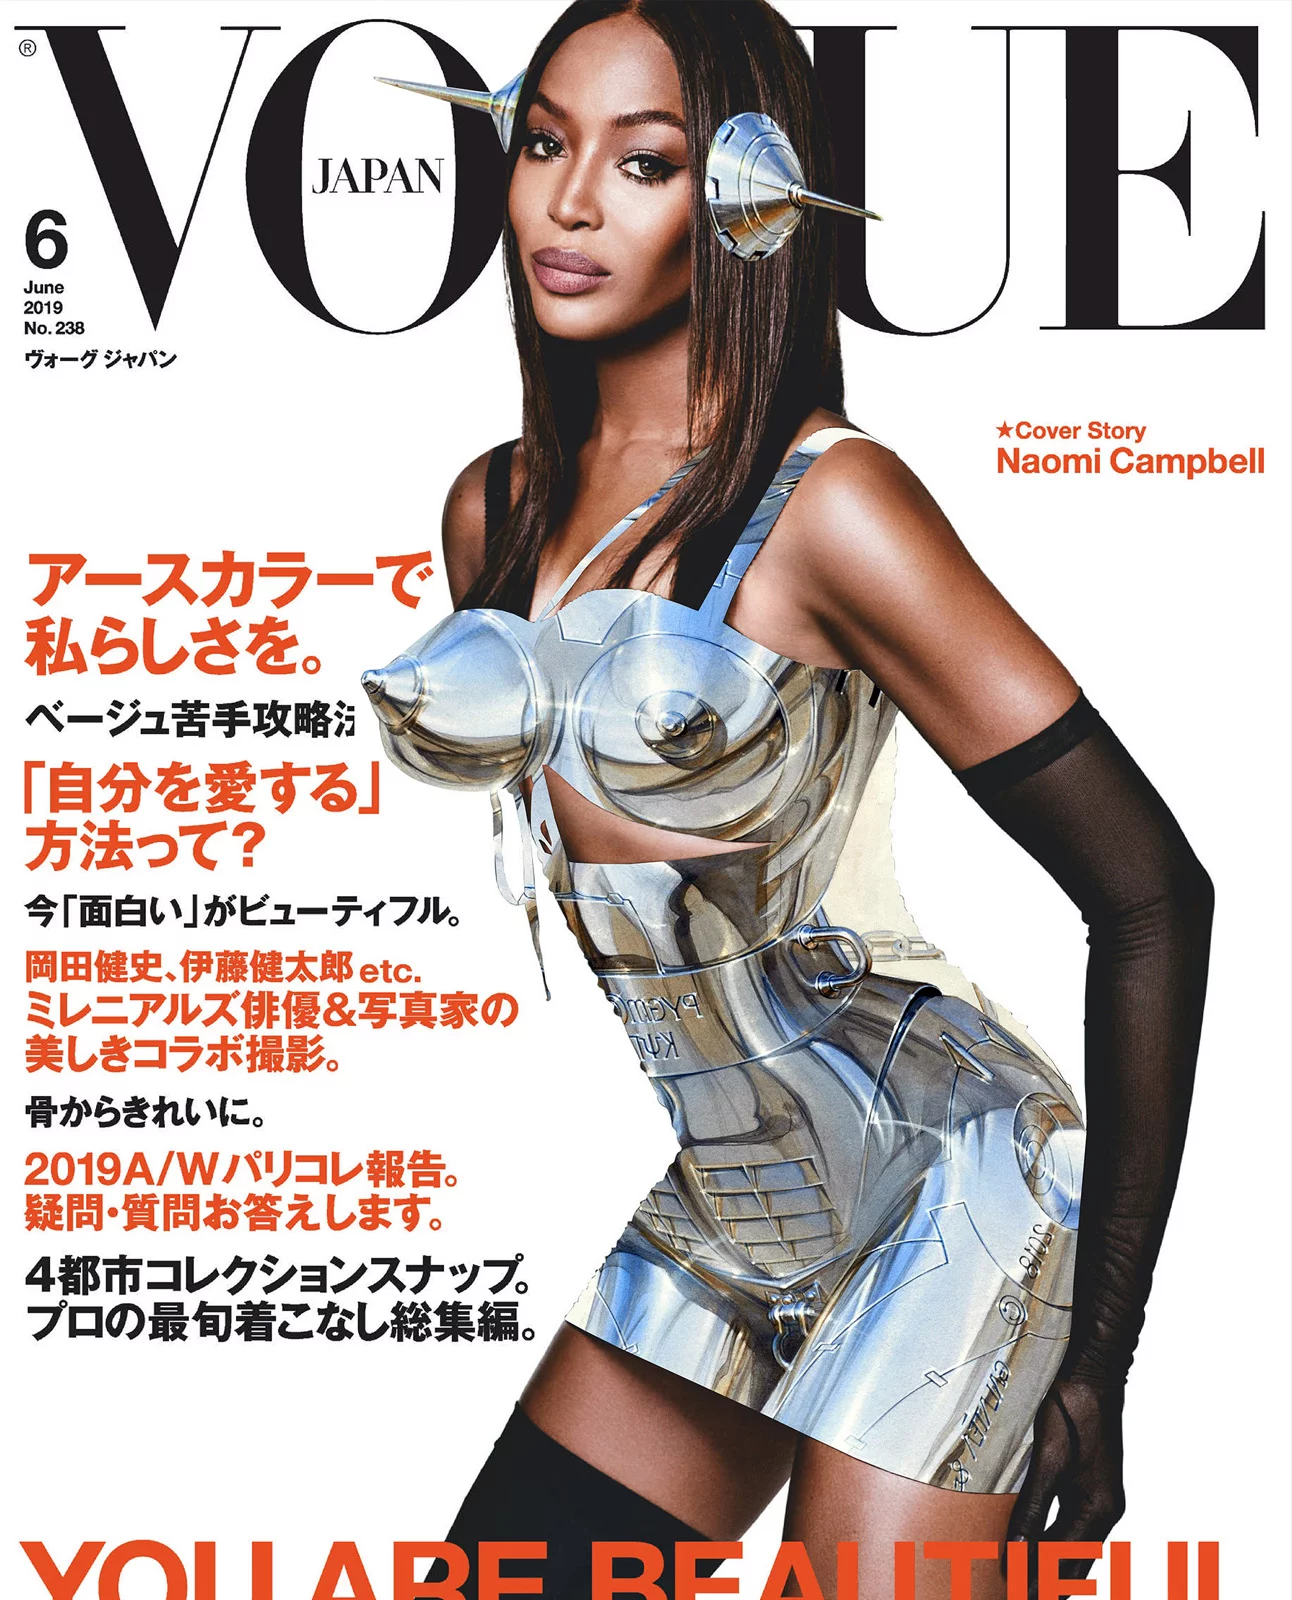 Rework x Naomi Campbell by Portis WASP